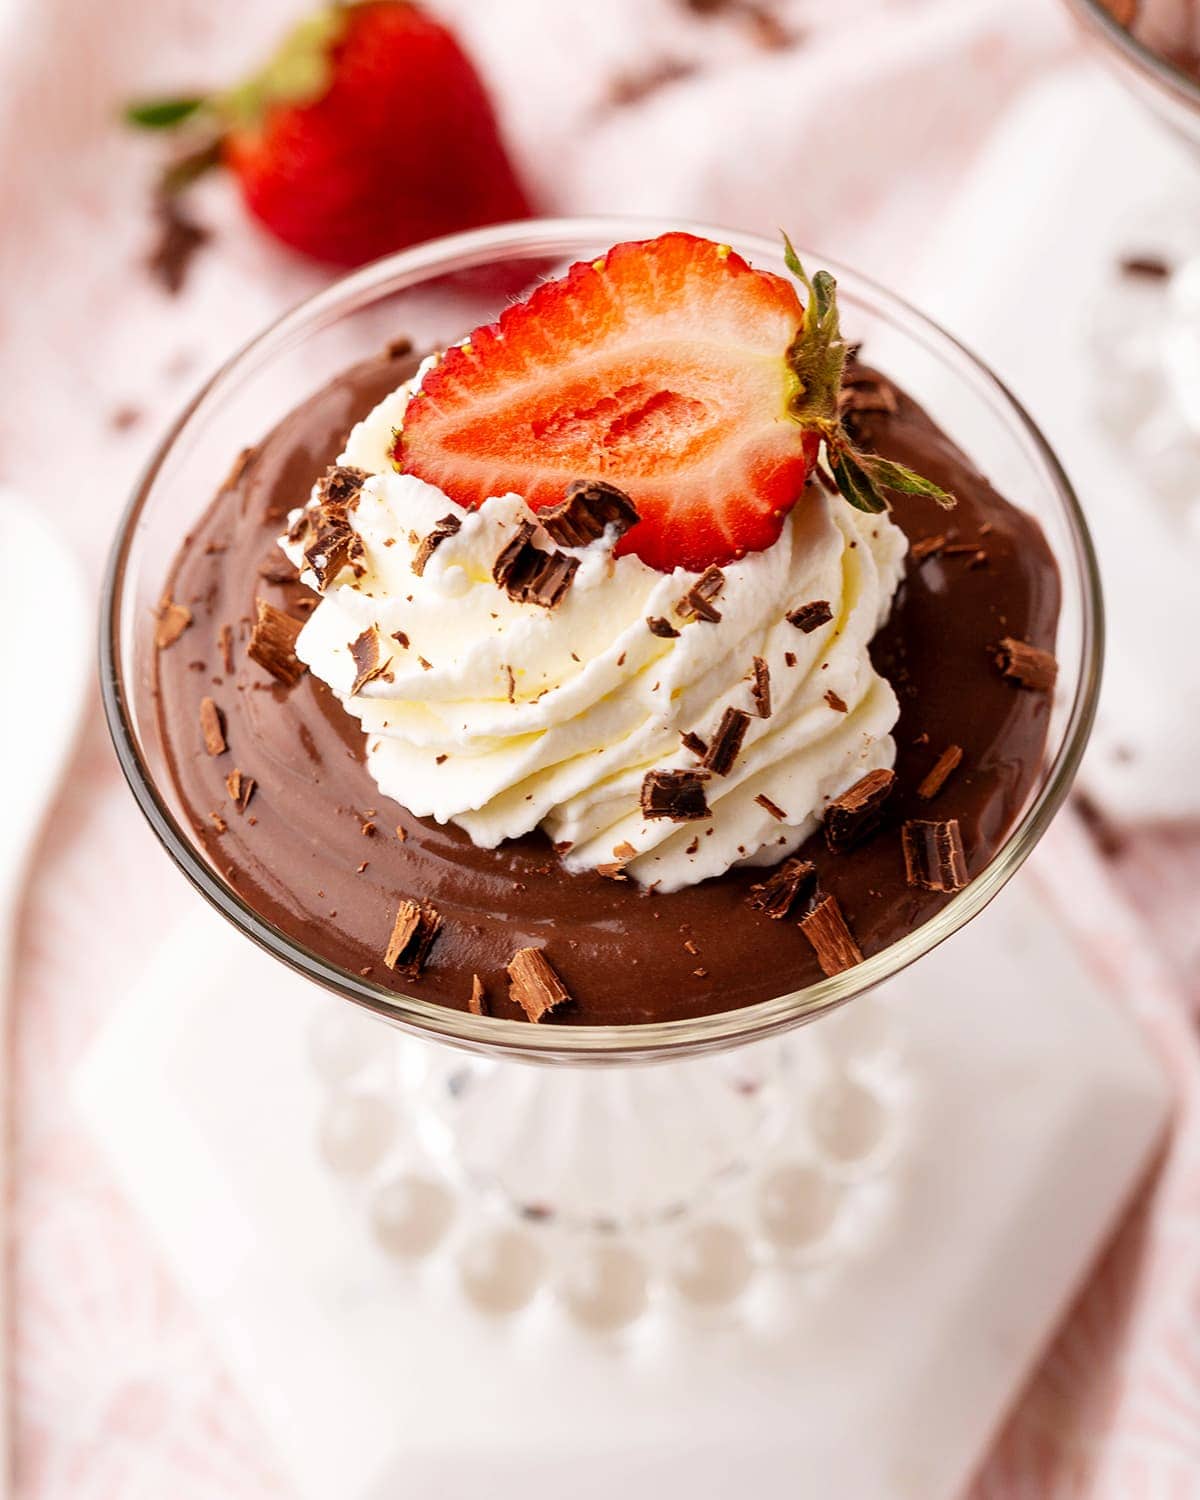 A glass jar full of chocolate pudding topped with whipped cream and half a strawberry.